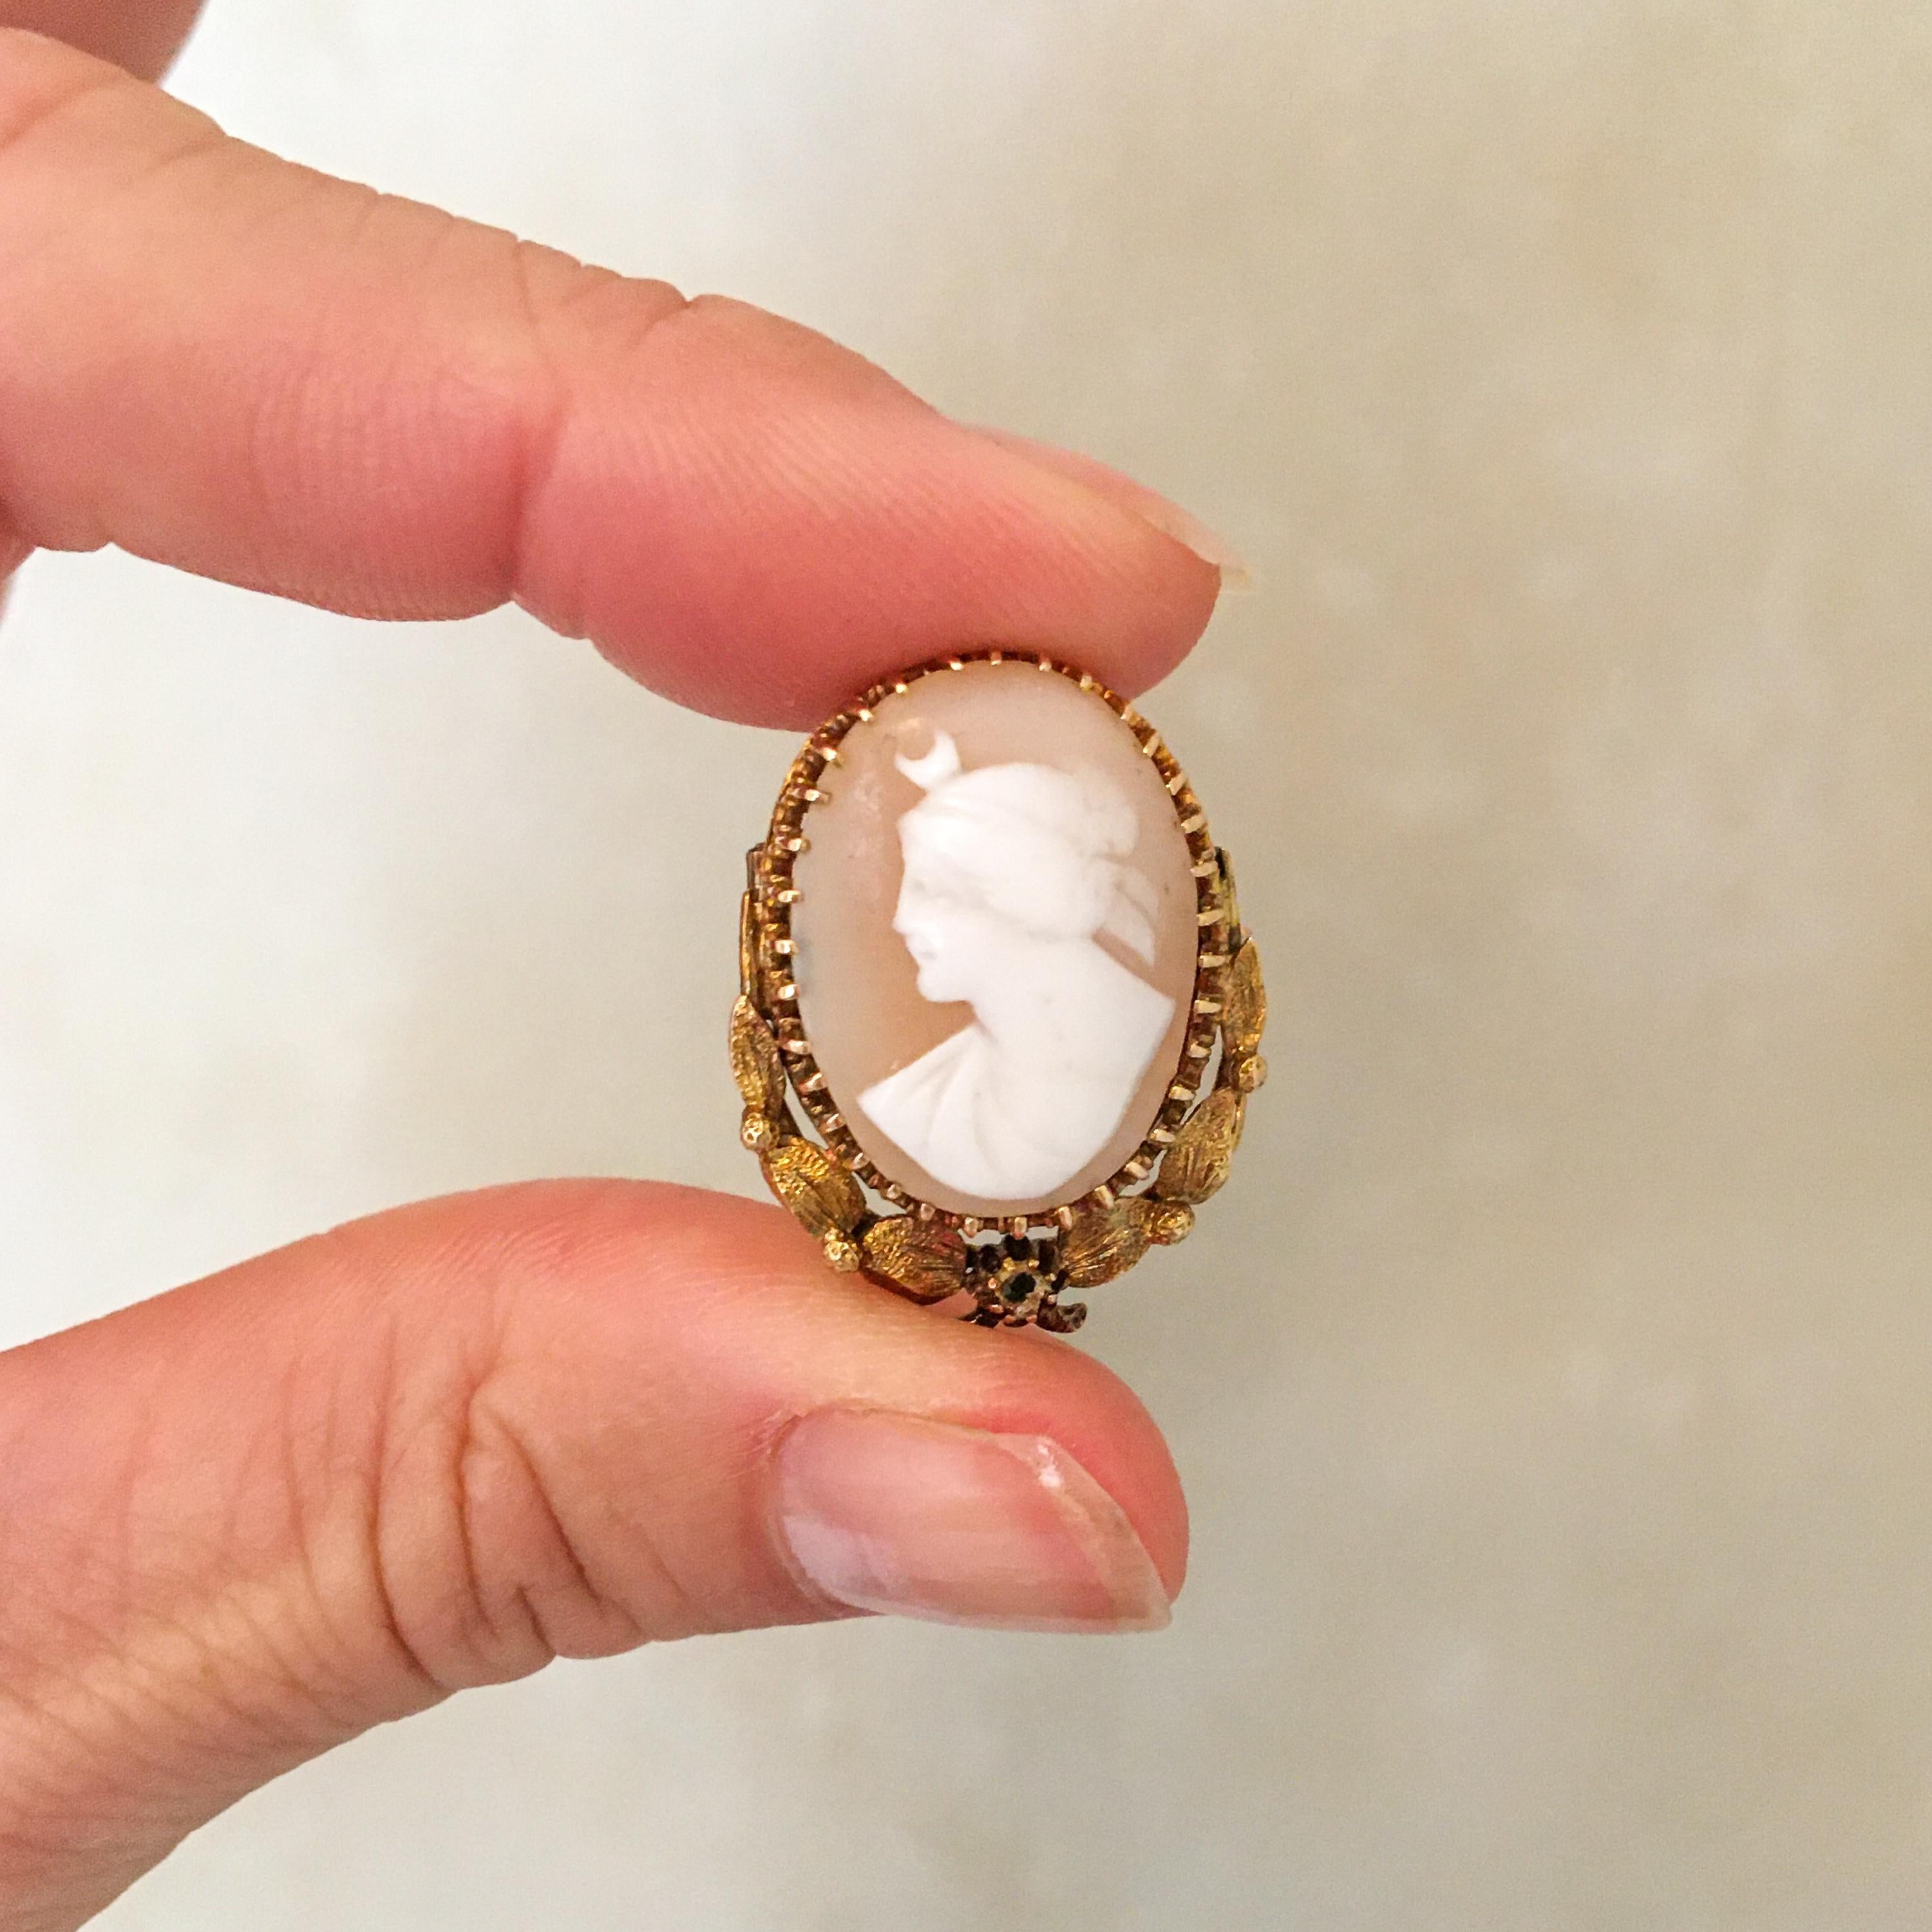 A vintage 14 karat yellow gold shell cameo brooch pendant. The oval-shaped brooch pendant is created with a pinkish and white cameo carved female silhouette. The cameo is set in a 14 karat yellow gold frame and clamped between gold prongs. The